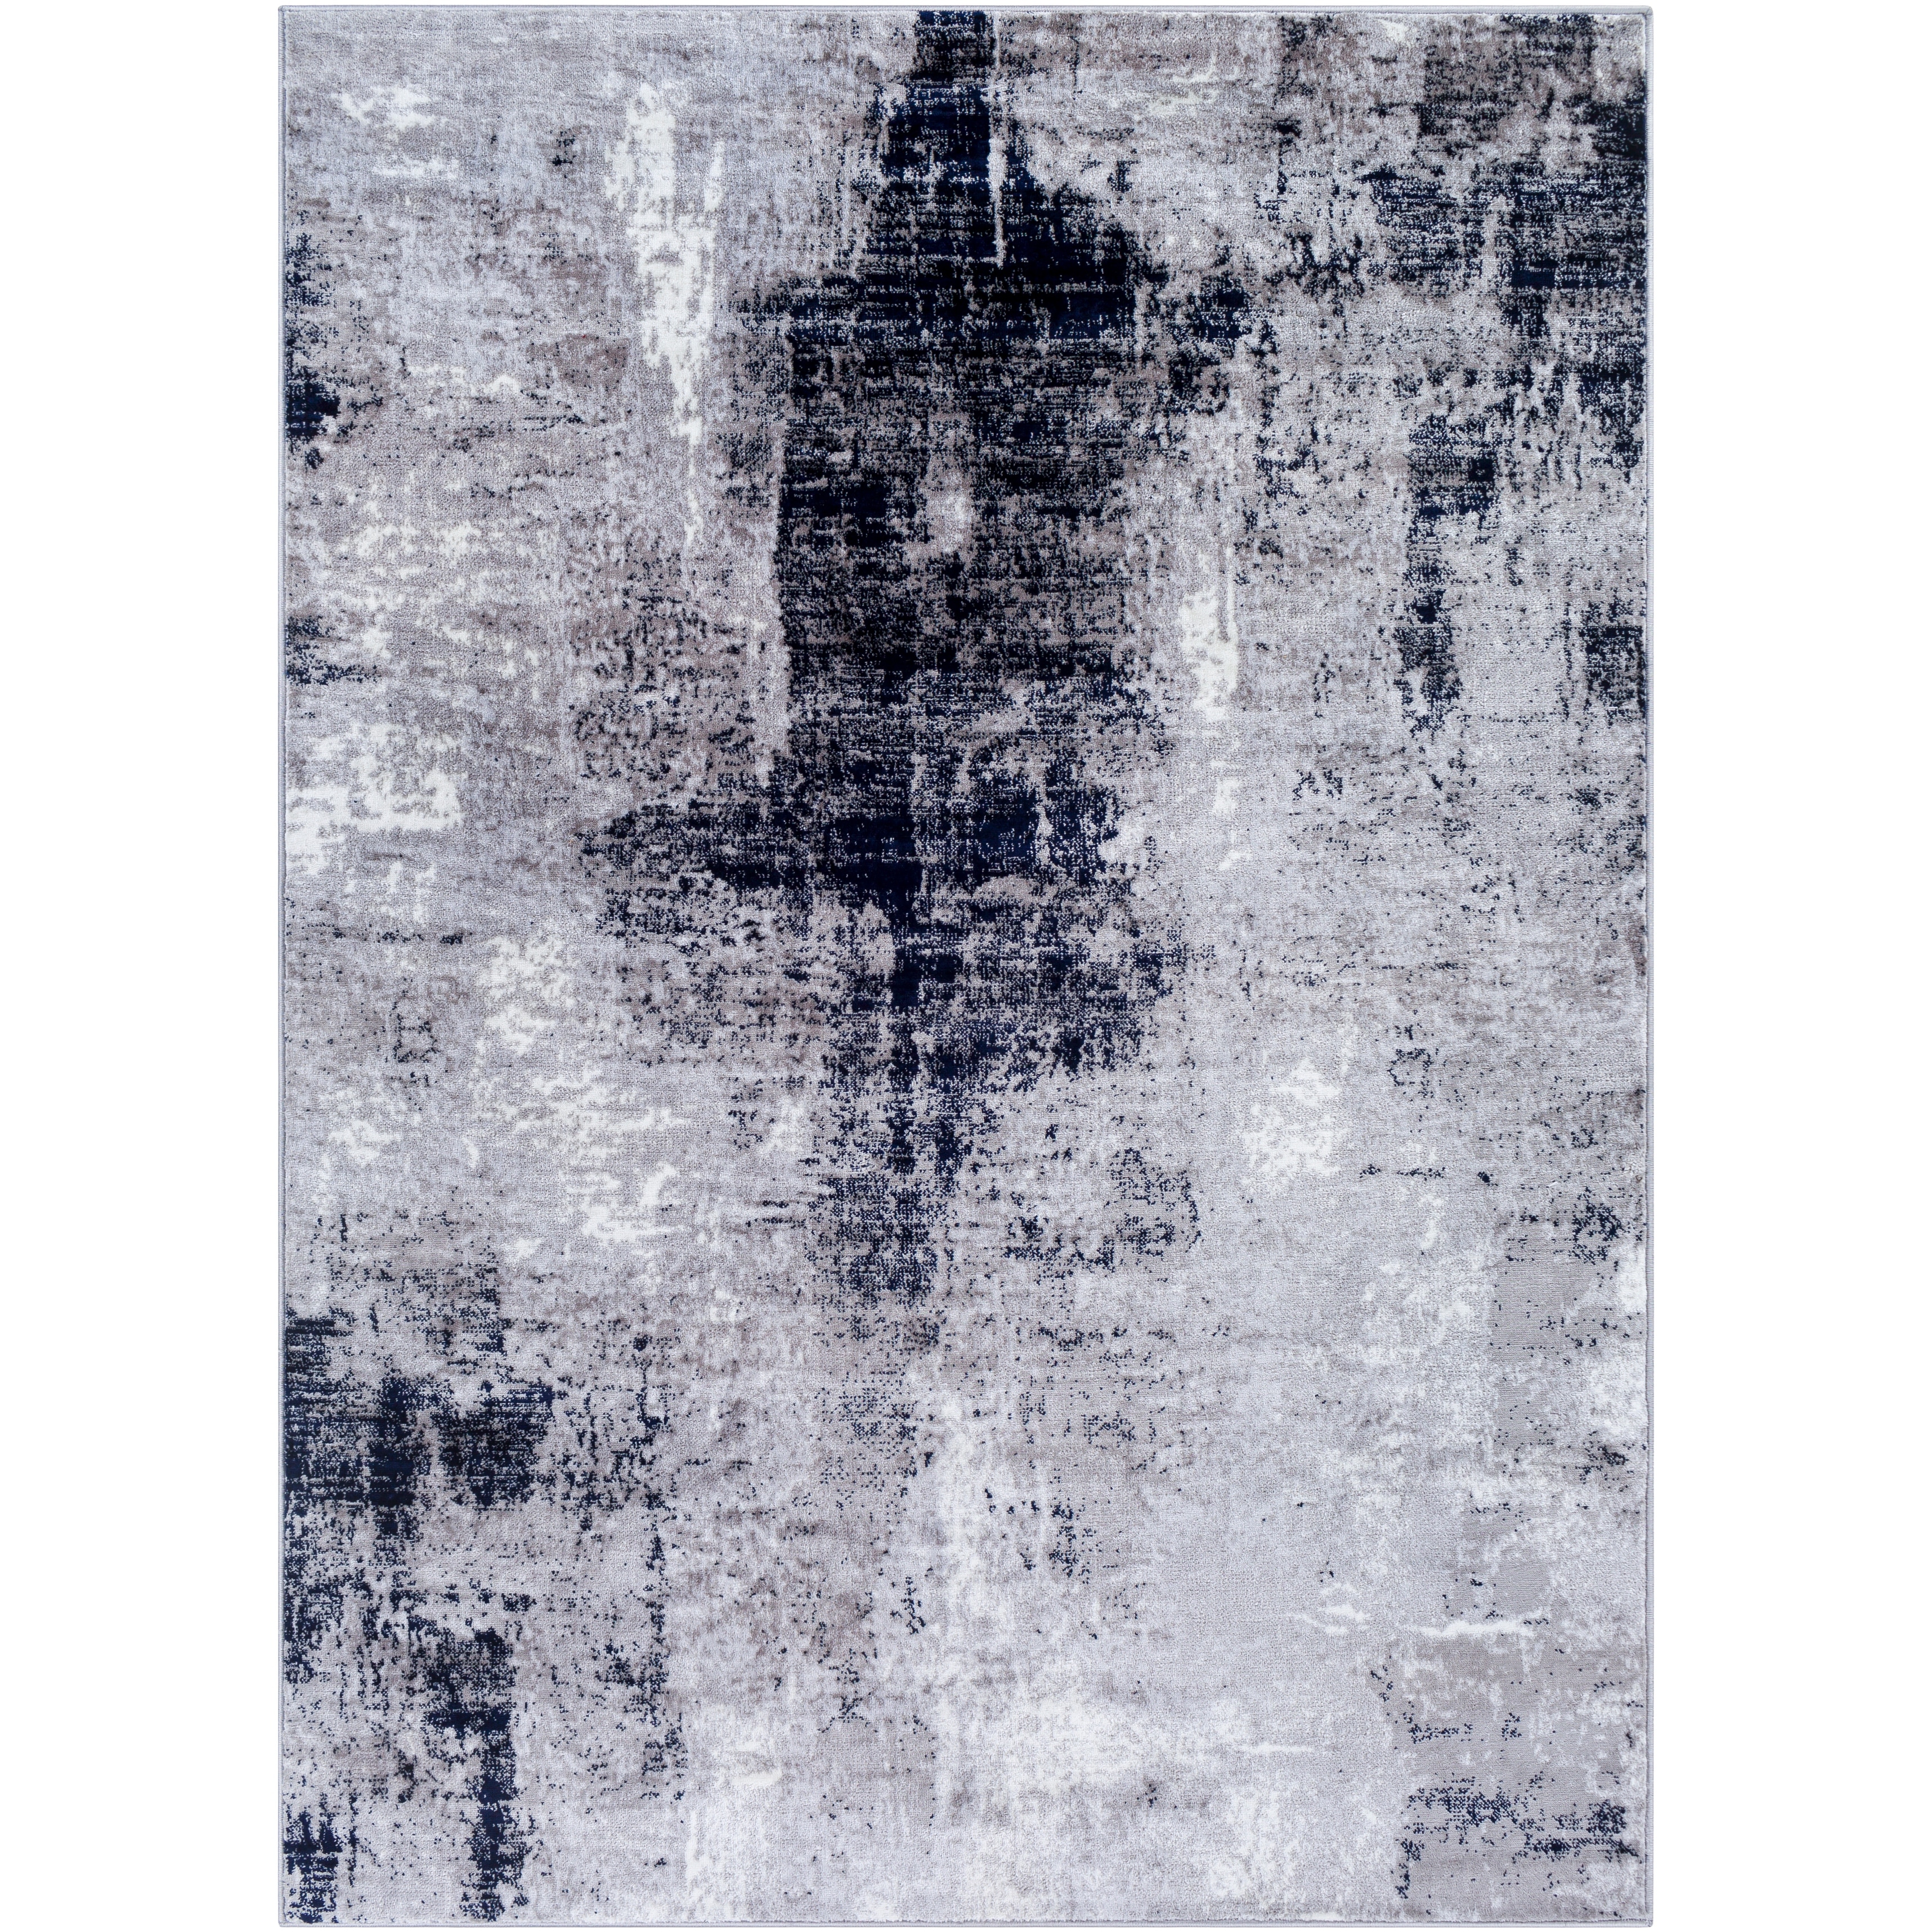 https://ak1.ostkcdn.com/images/products/is/images/direct/ac3ad90a9d24e2e519421ecb23fb0376d0baa64d/Cooke-Industrial-Abstract-Polyester-Area-Rug.jpg